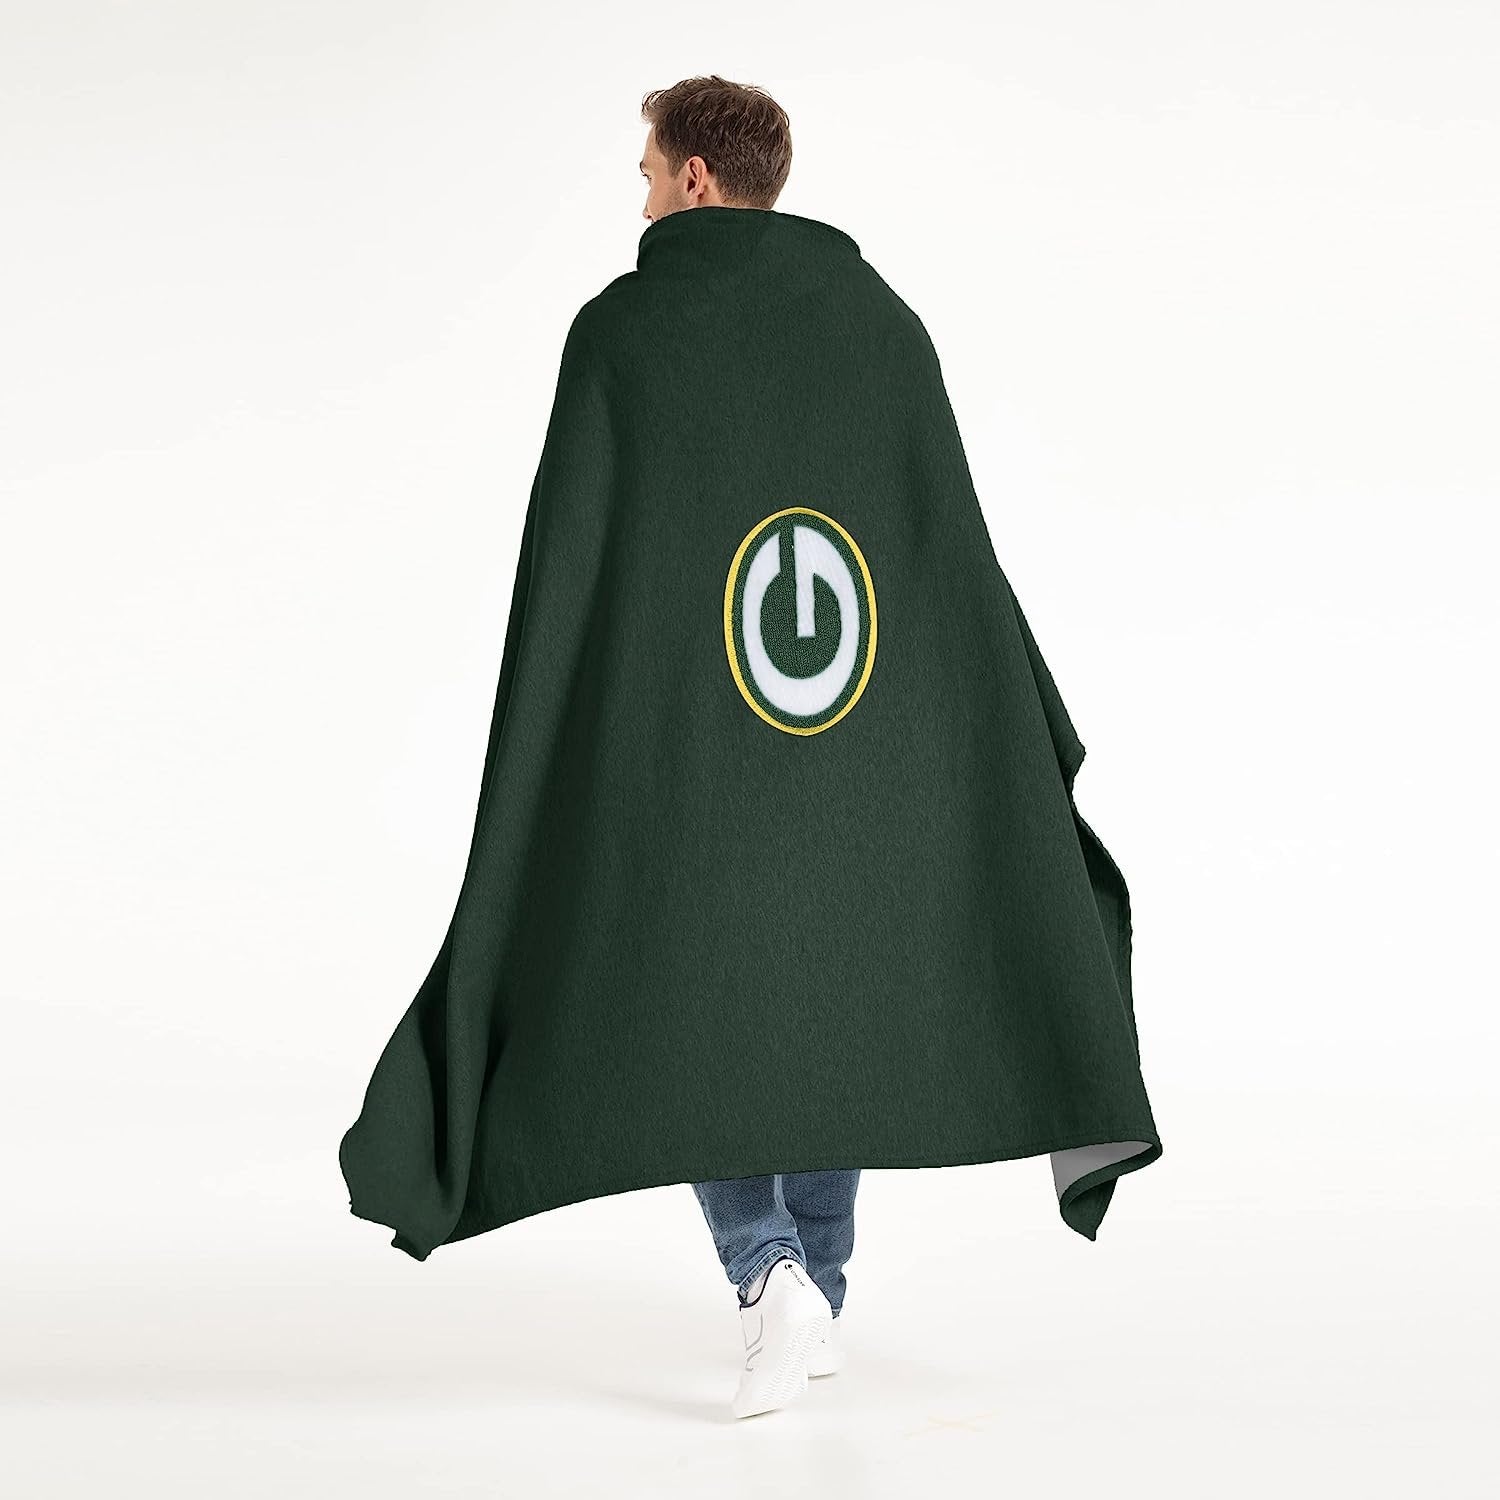 Green Bay Packers Throw Blanket, Sweatshirt Design, Embroidered Logo, Dominate Style, 54x84 Inch